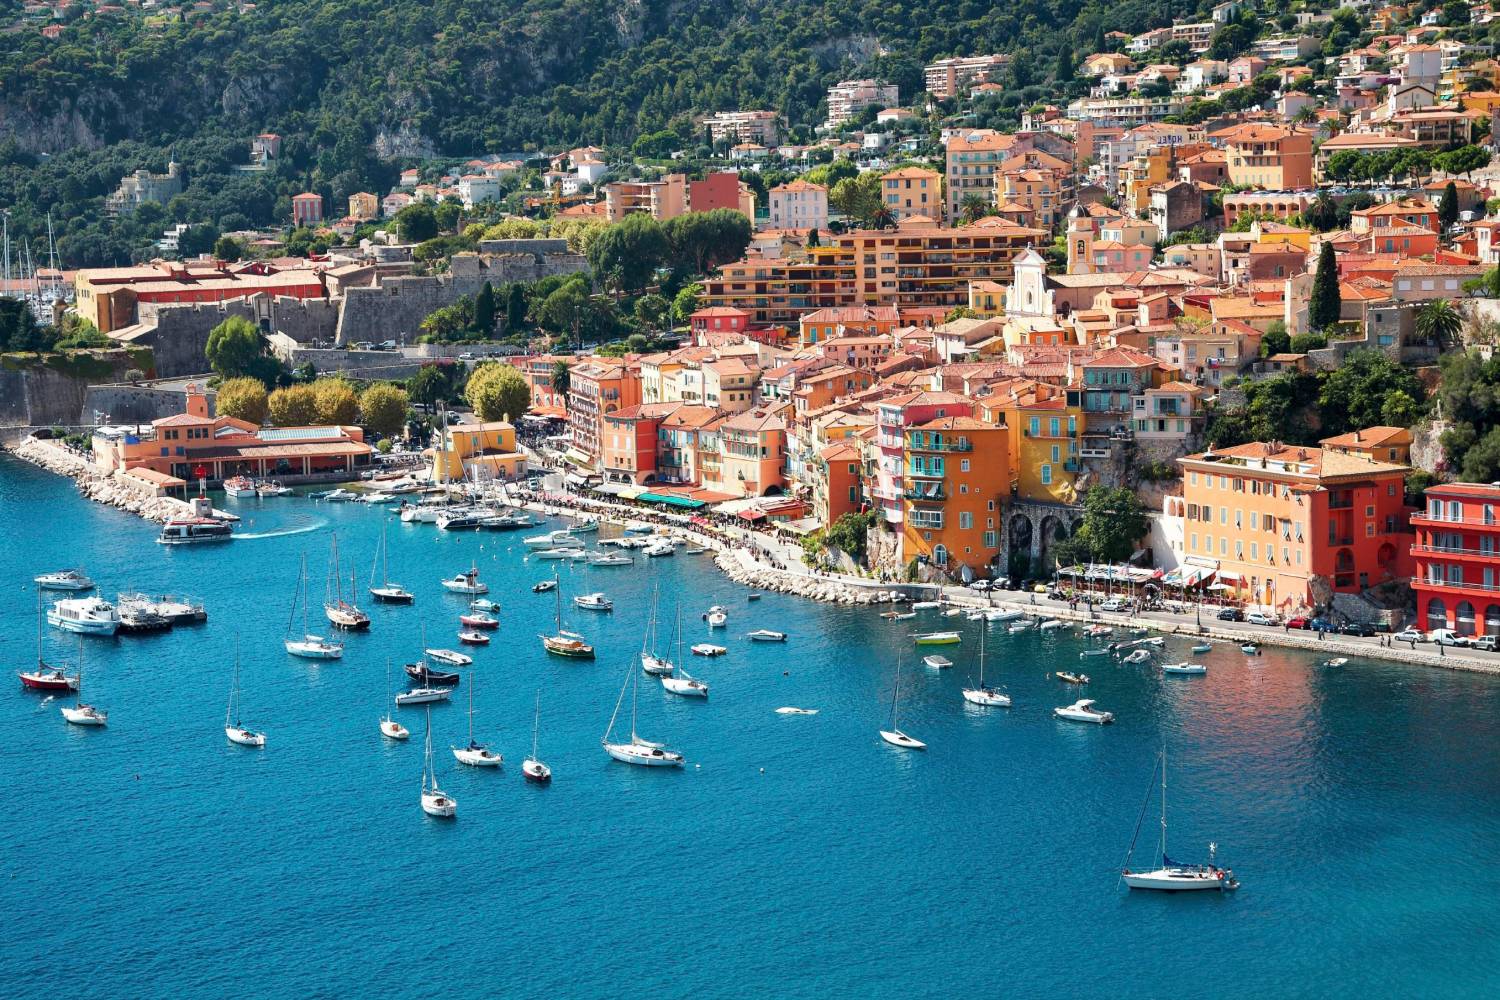 Enjoy a private chef after an amazing day in Villefranche sur Mer - Take a Chef